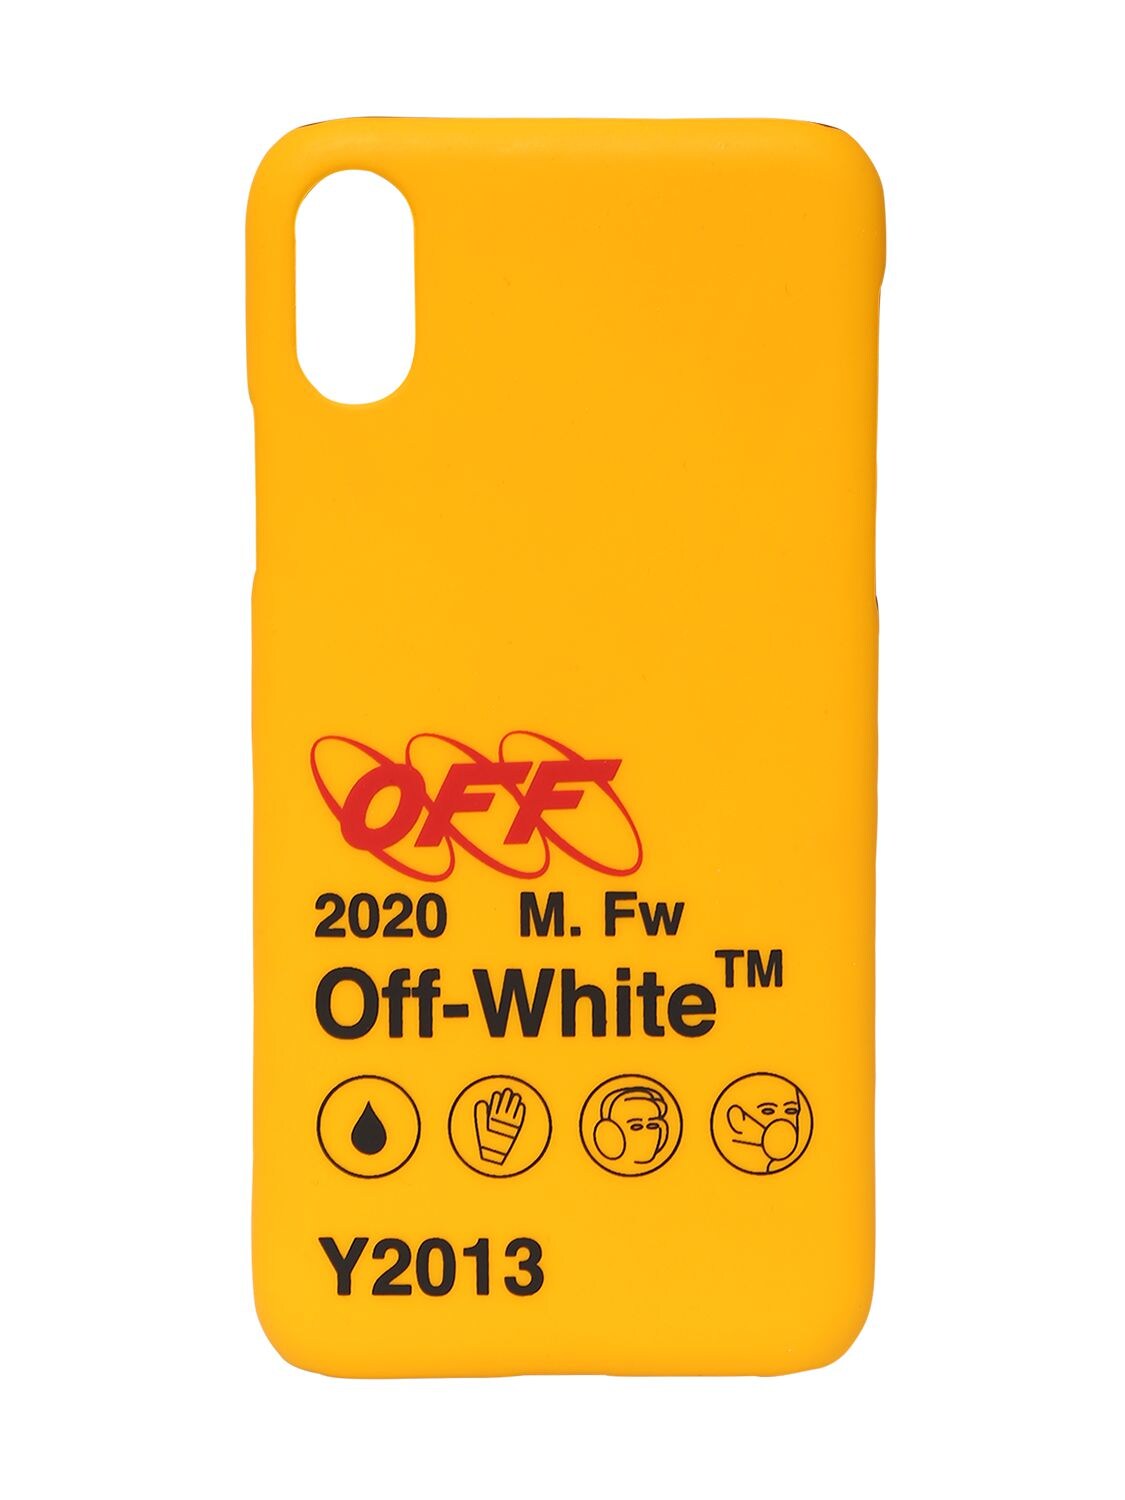 OFF-WHITE INDUSTRIAL Y013 TECH IPHONE X/XS COVER,70IJS5025-NJAXMA2